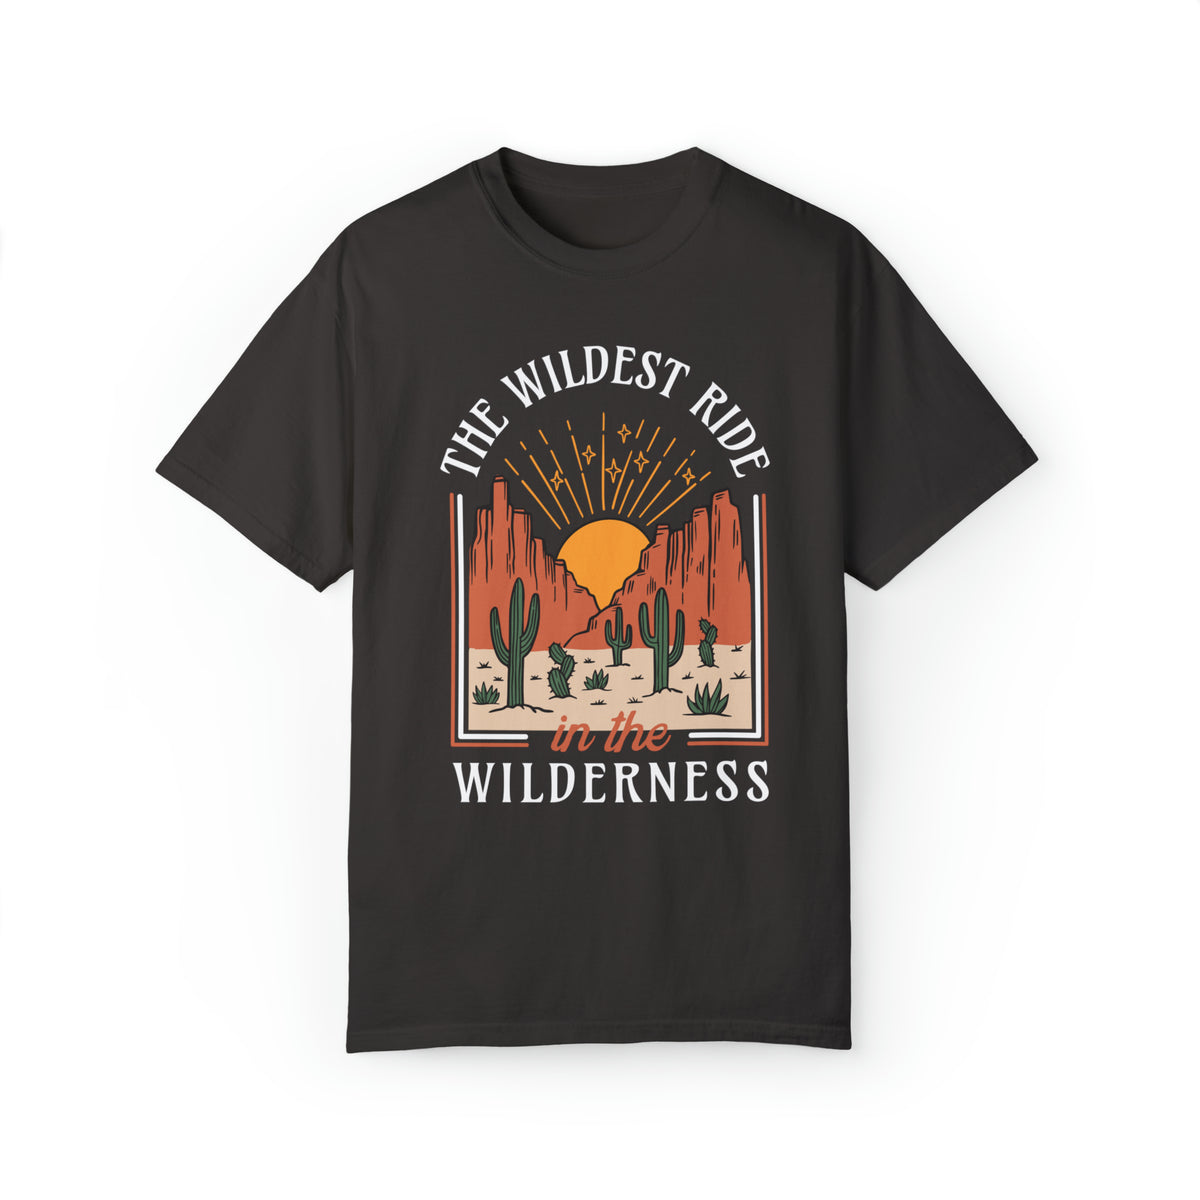 The Wildest Ride In The Wilderness Comfort Colors Unisex Garment-Dyed T-shirt